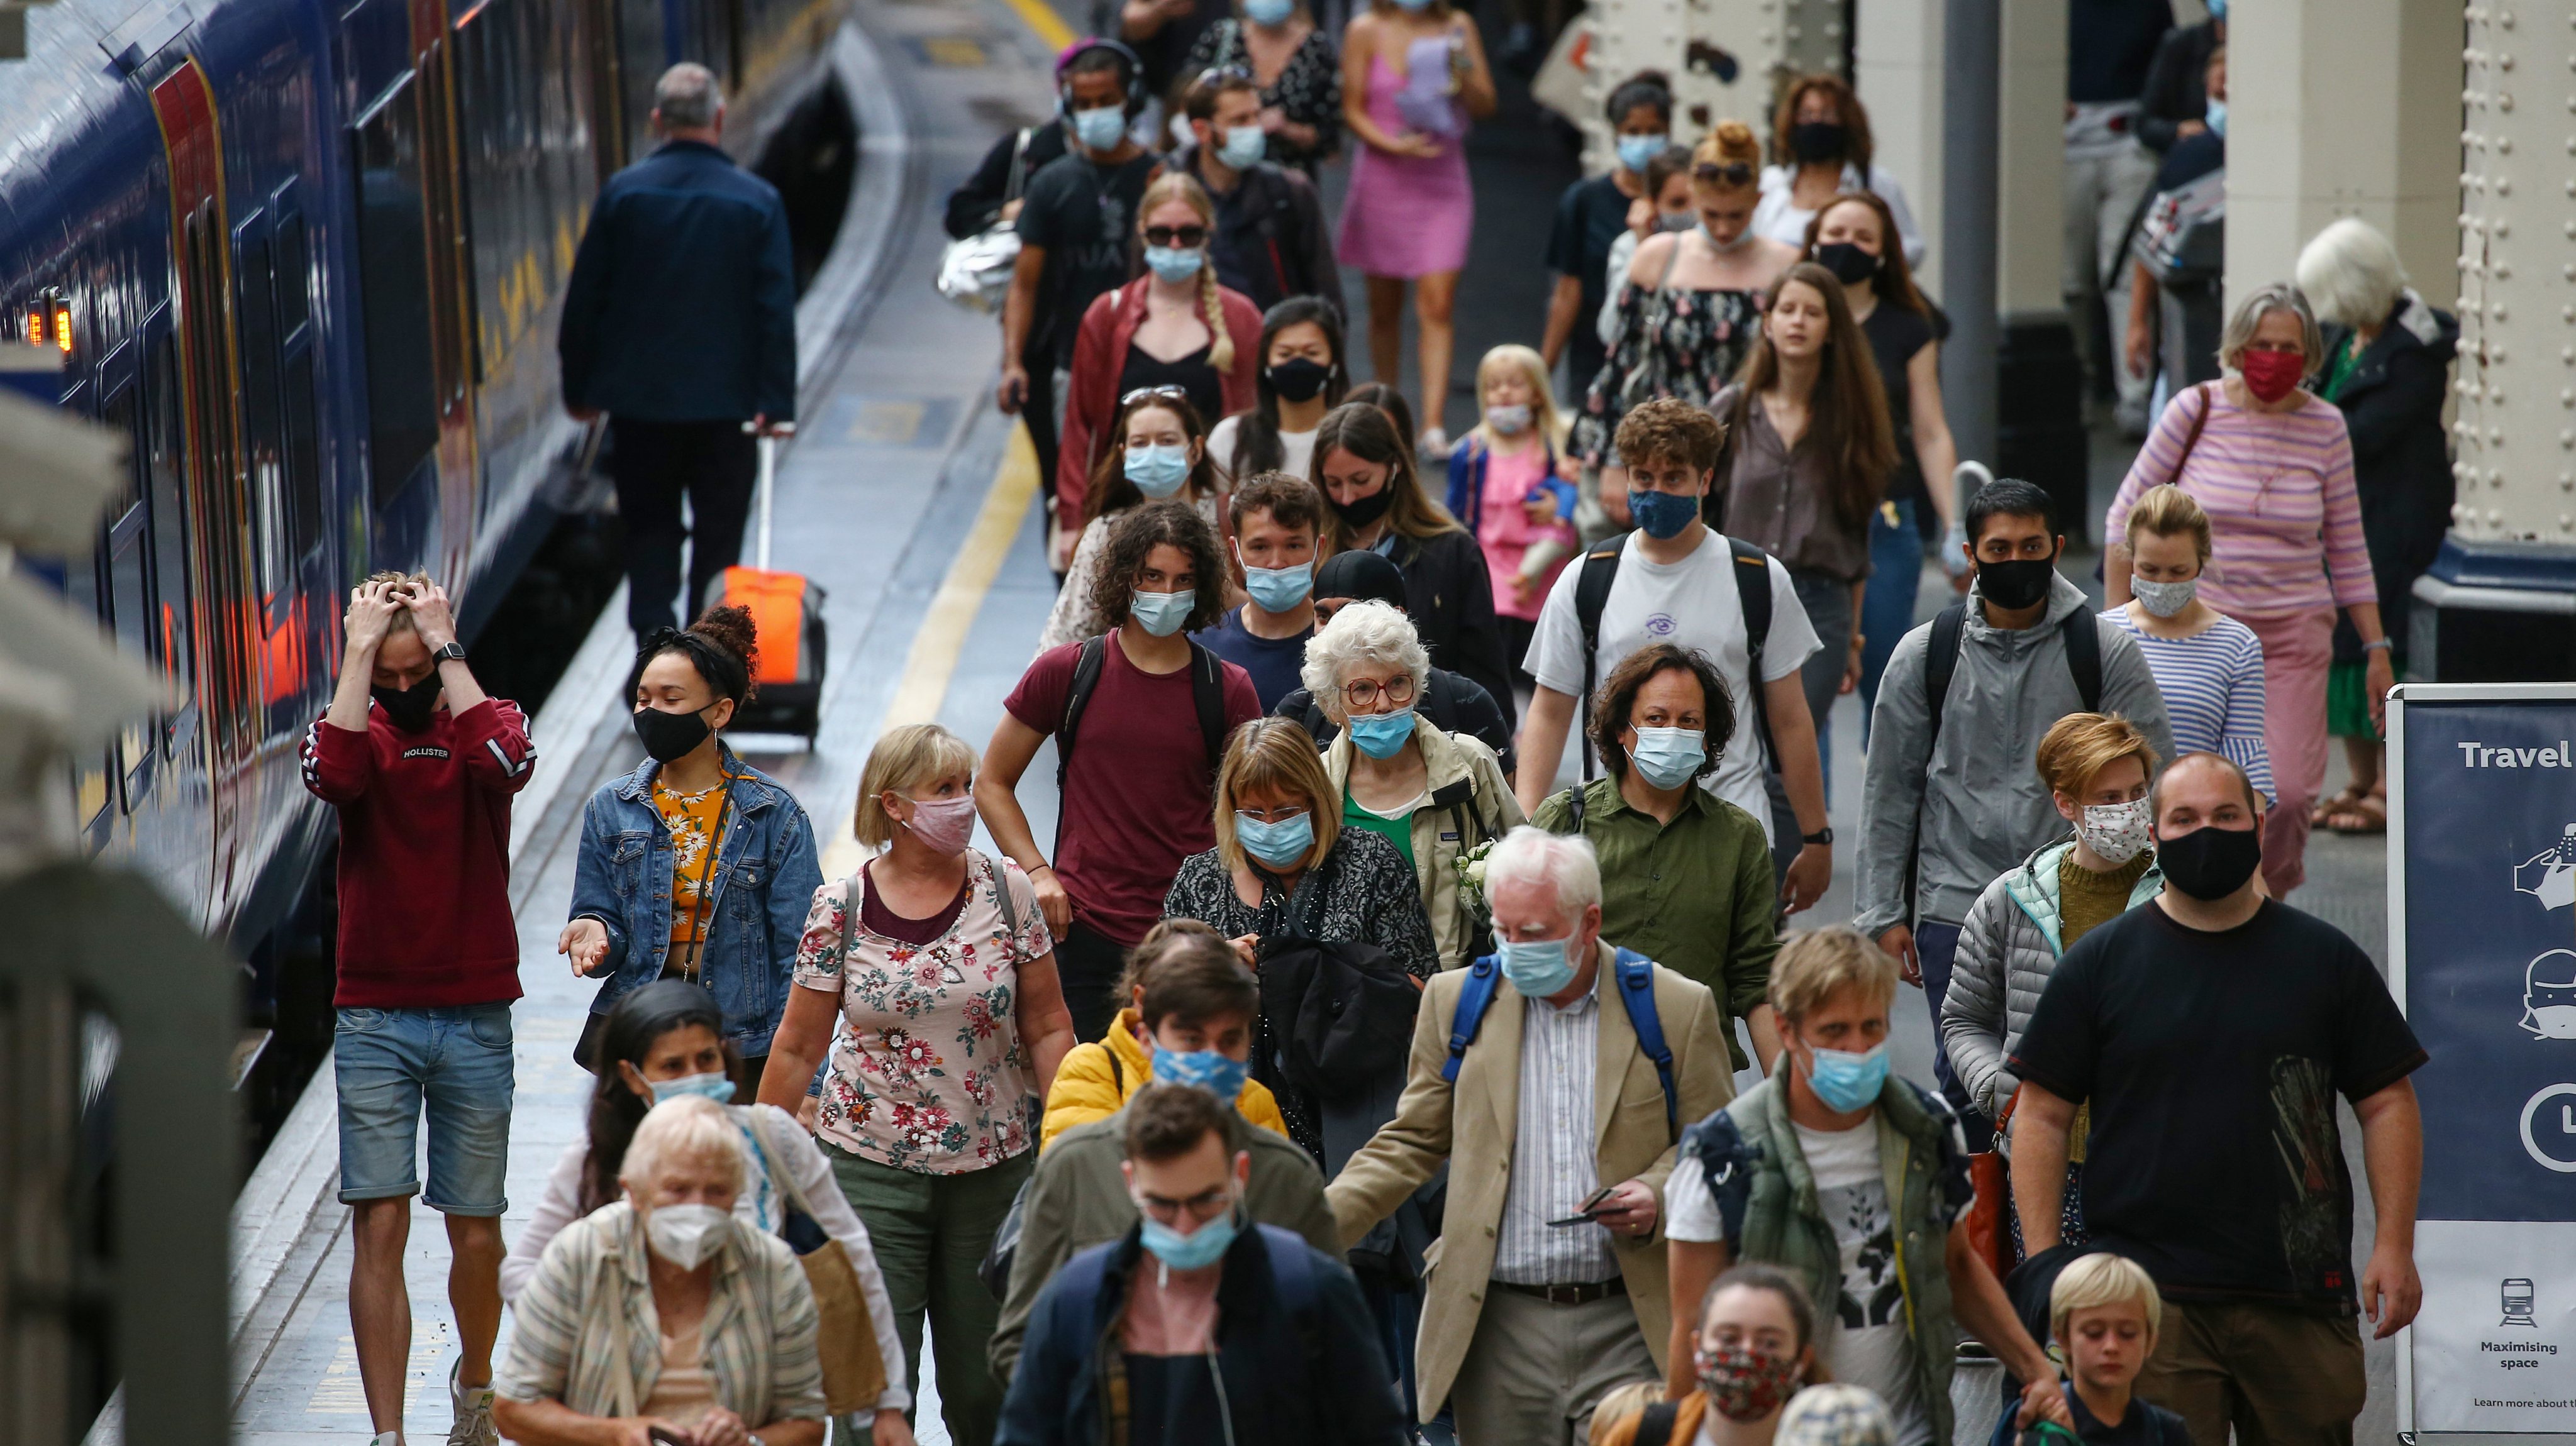 Mask Wearing To Soon Become Personal Choice, Says UK Minister